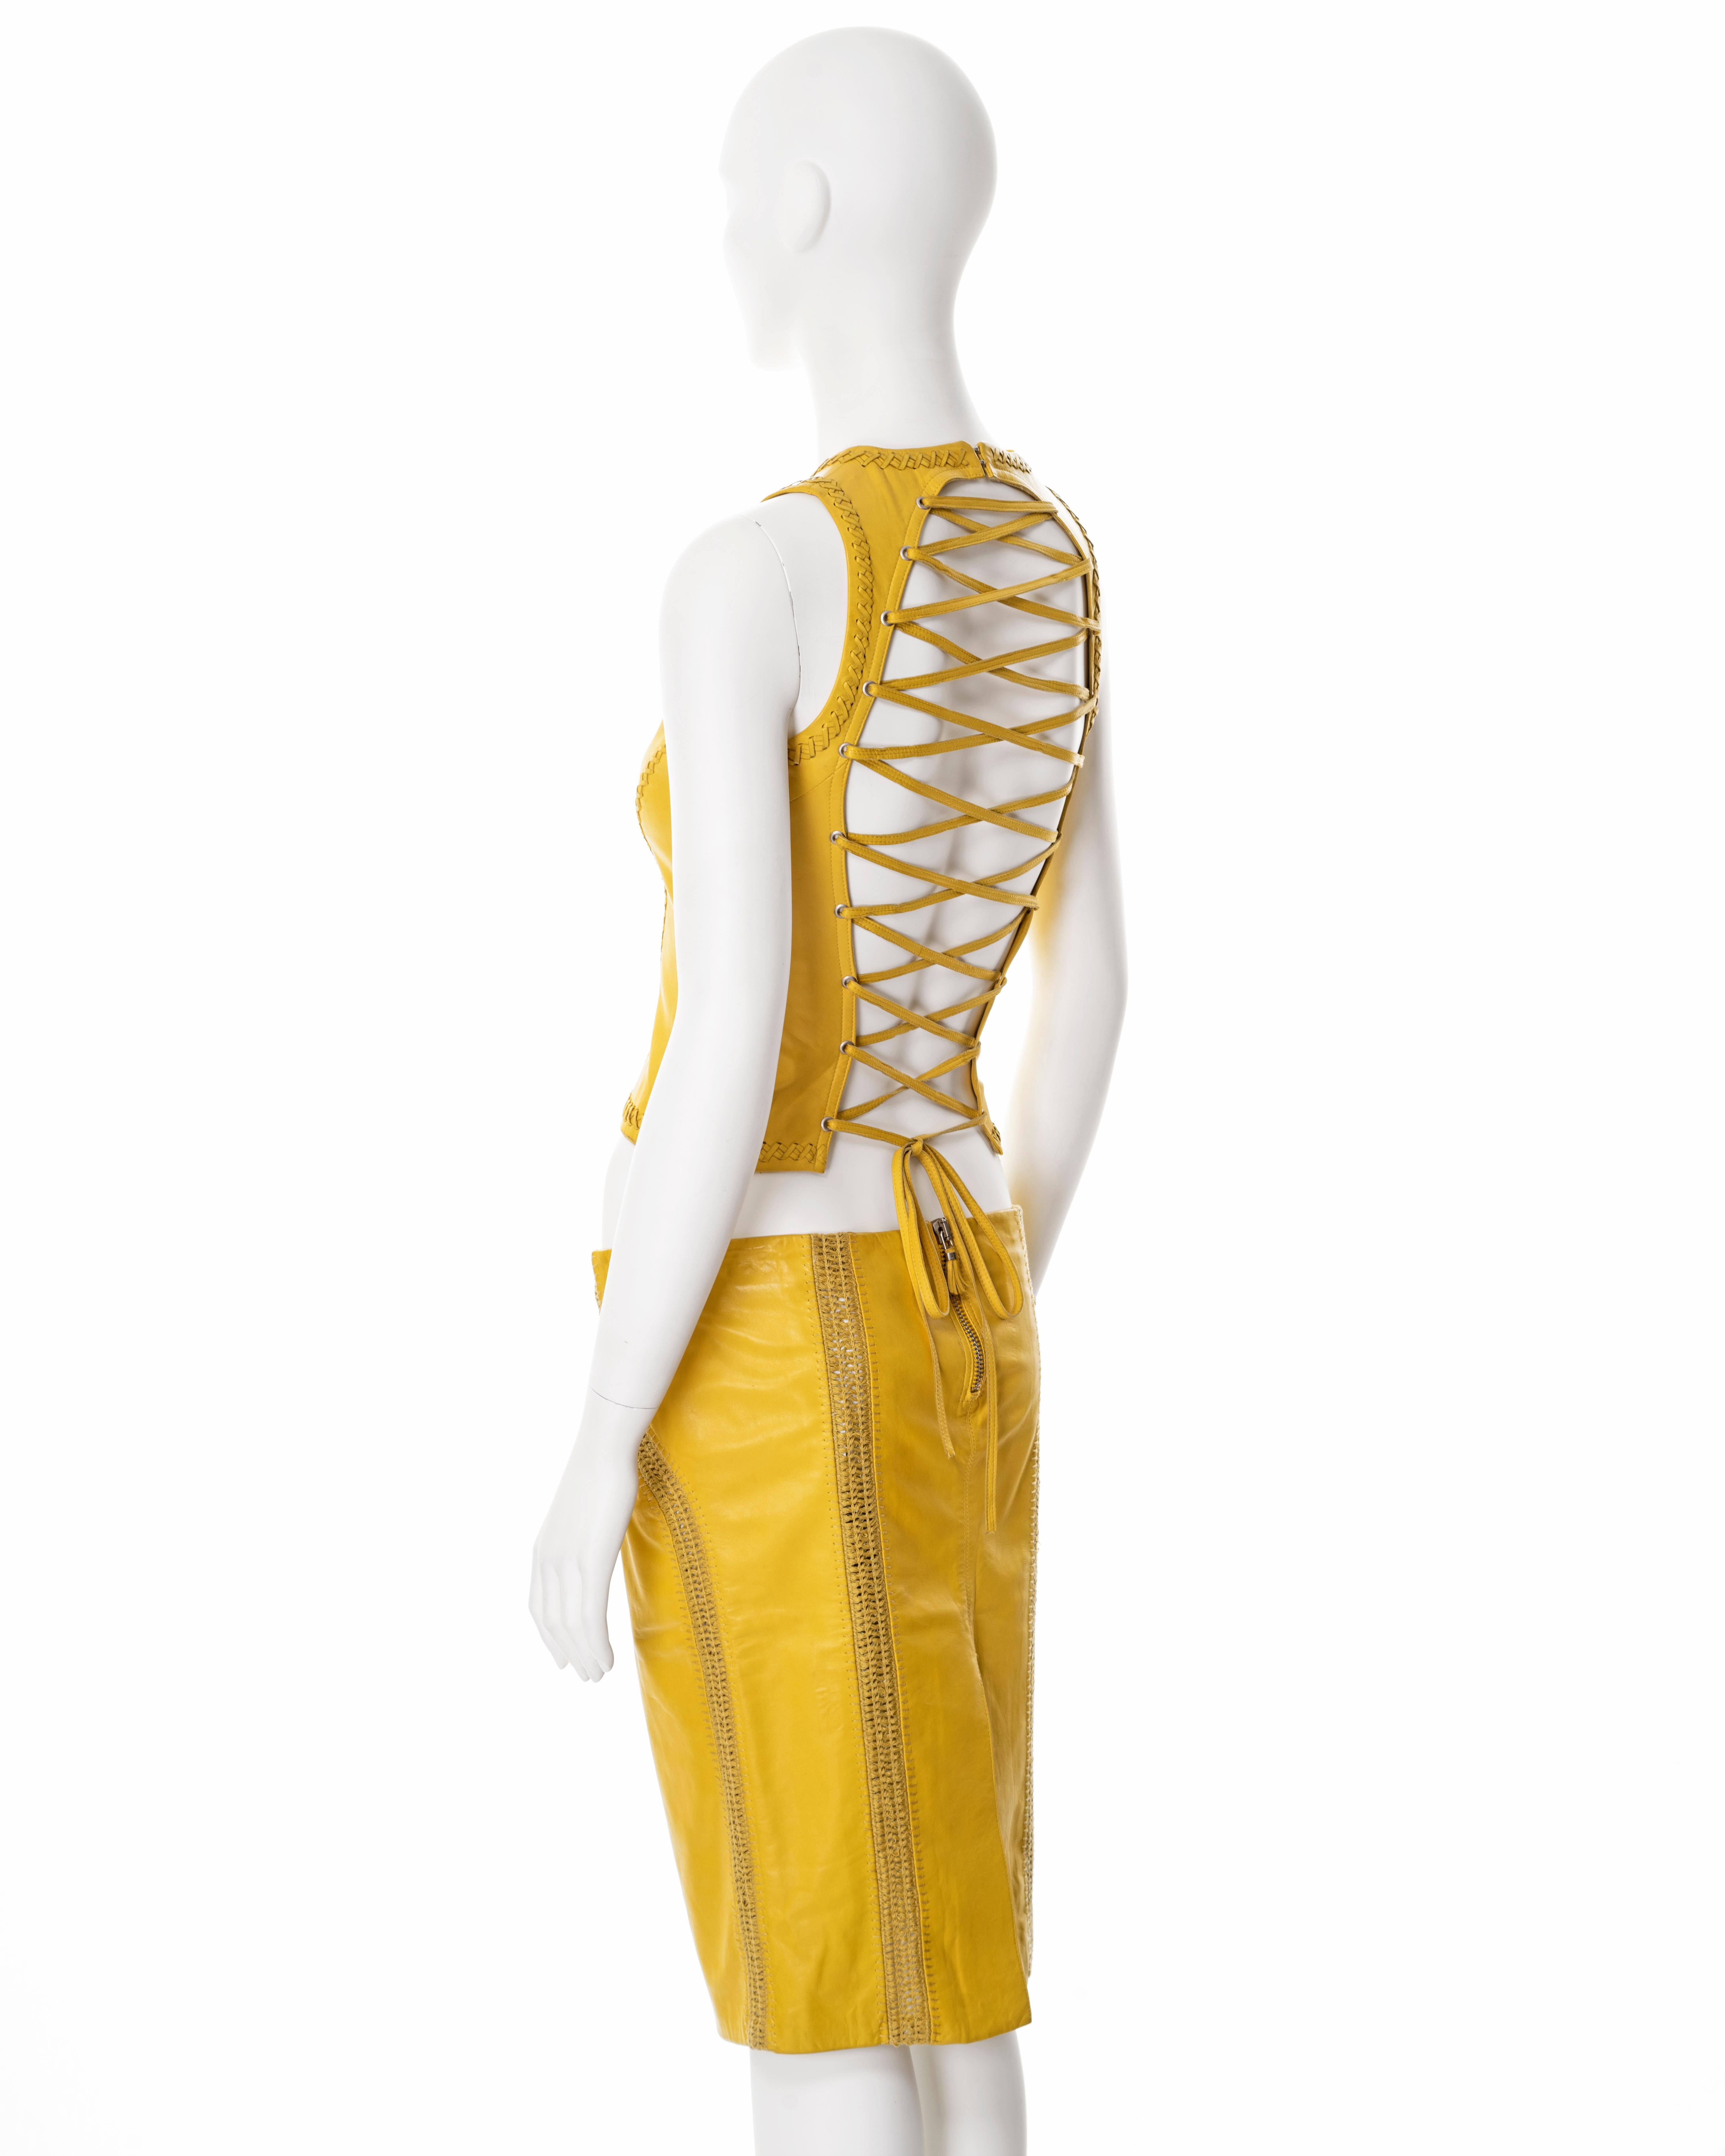 Gianni Versace yellow lambskin leather top and skirt, ss 2003 For Sale 6